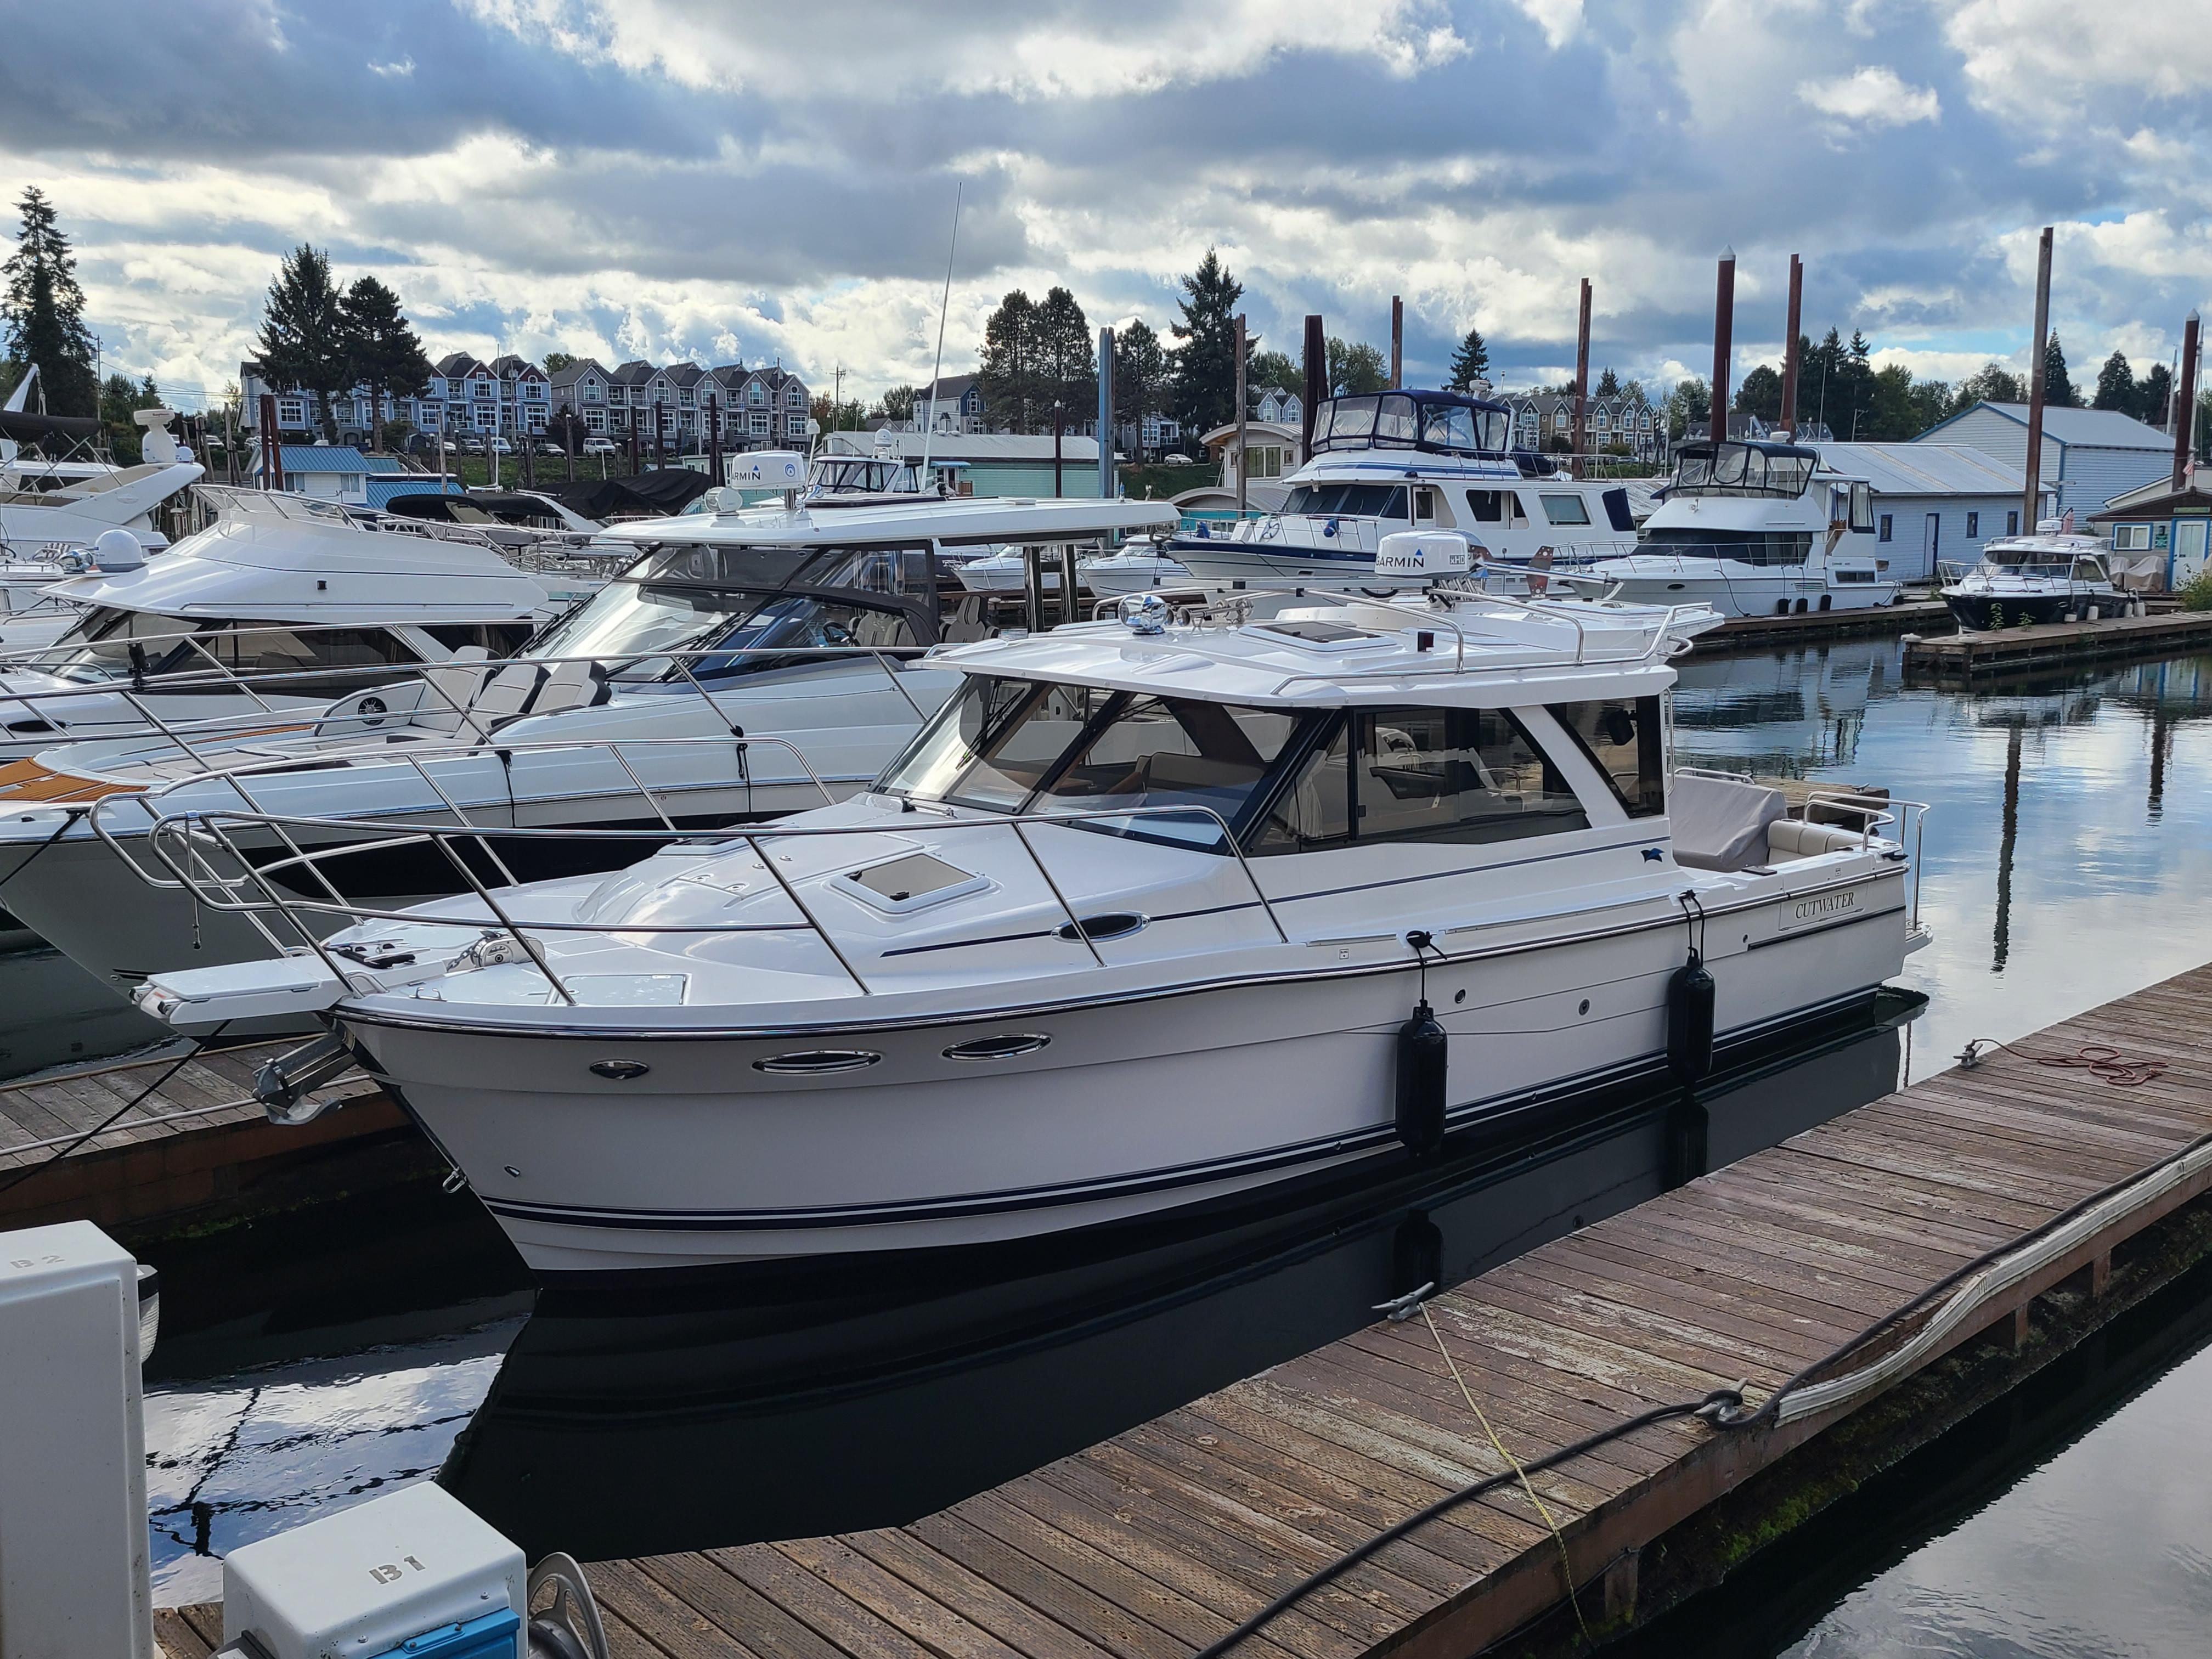 Boats for sale in Seattle - Boat Trader